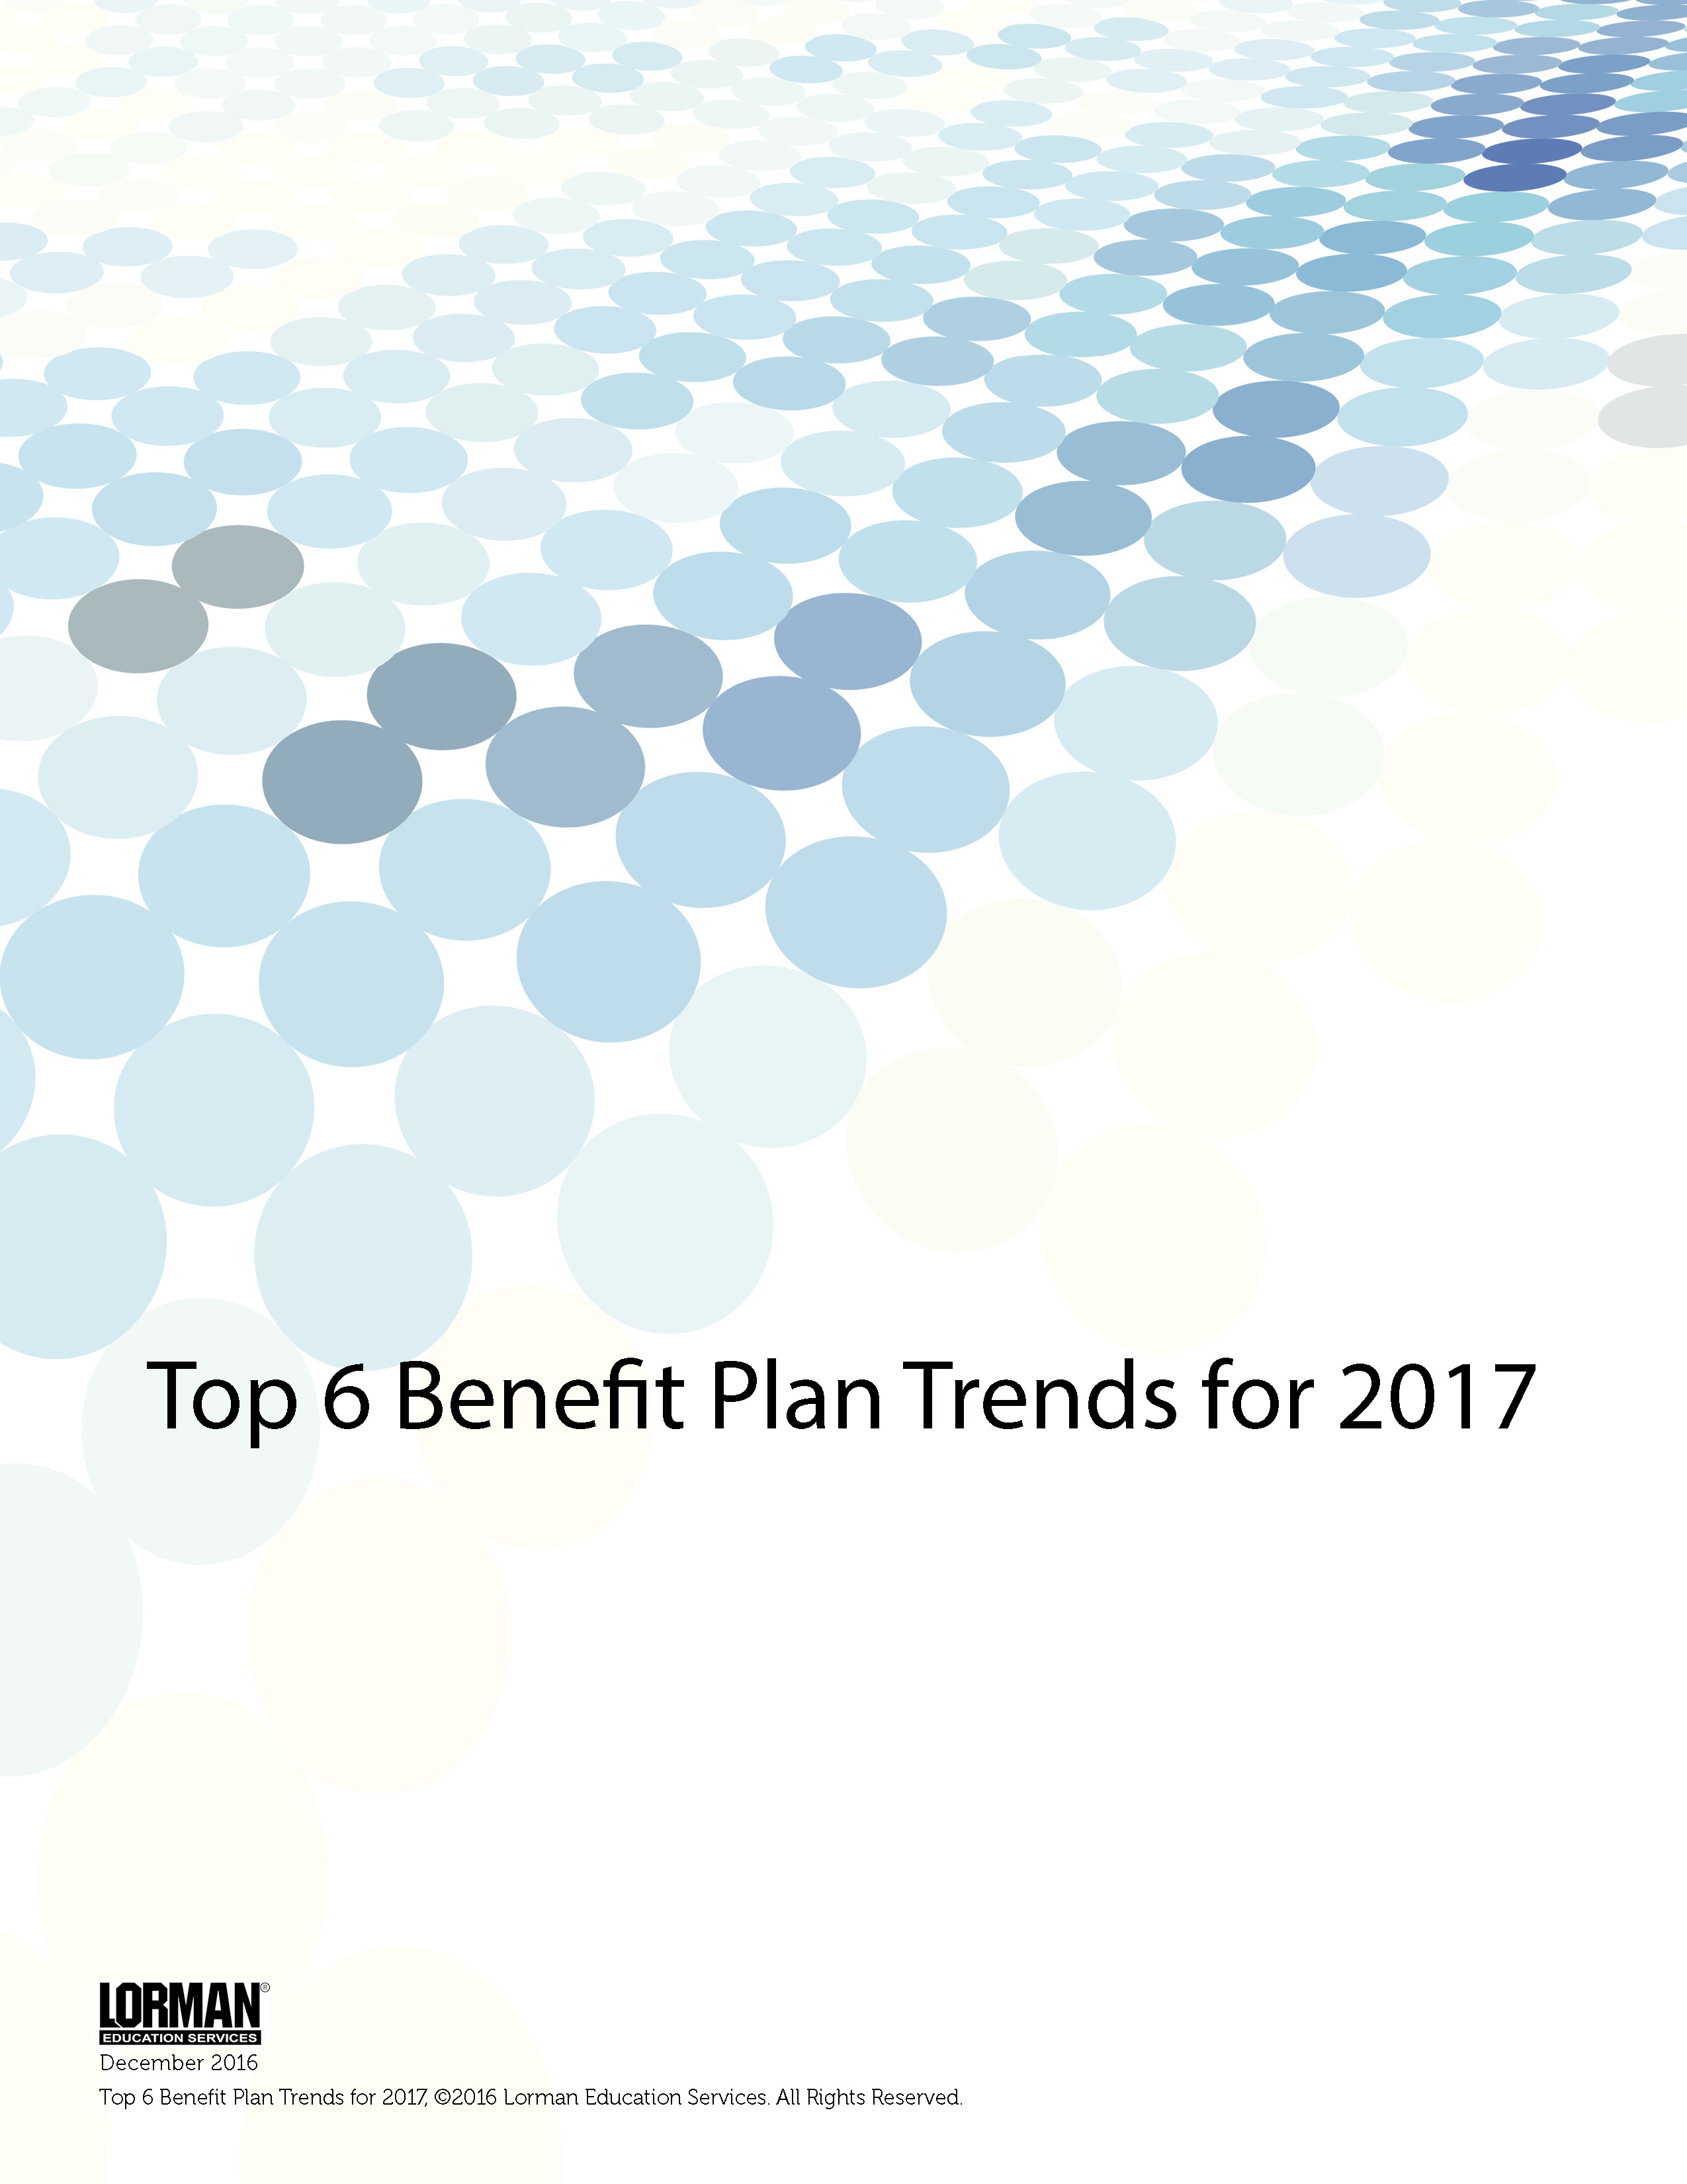 Top 6 Benefit Plan Trends for 2017